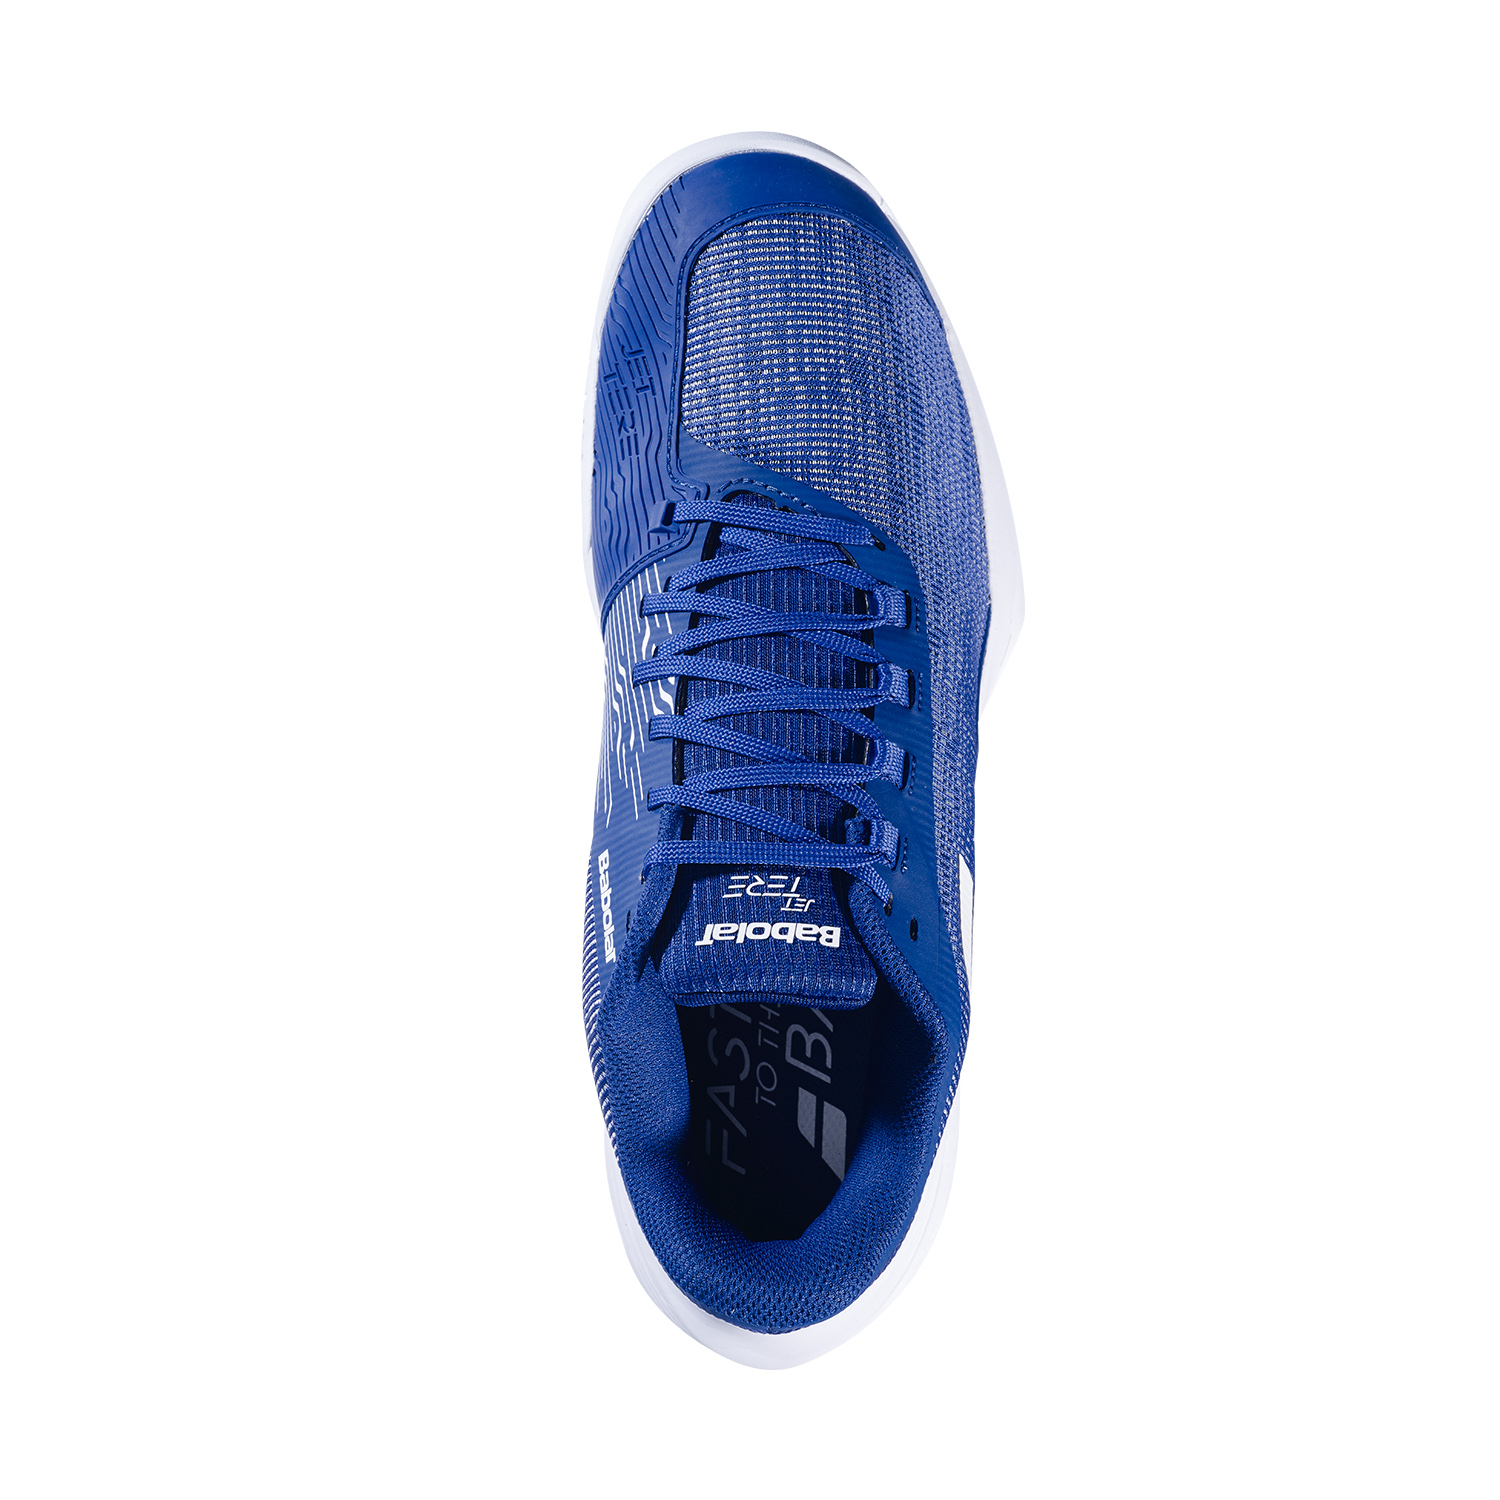 Babolat Jet Tere 2 All Court - Mombeo Blue